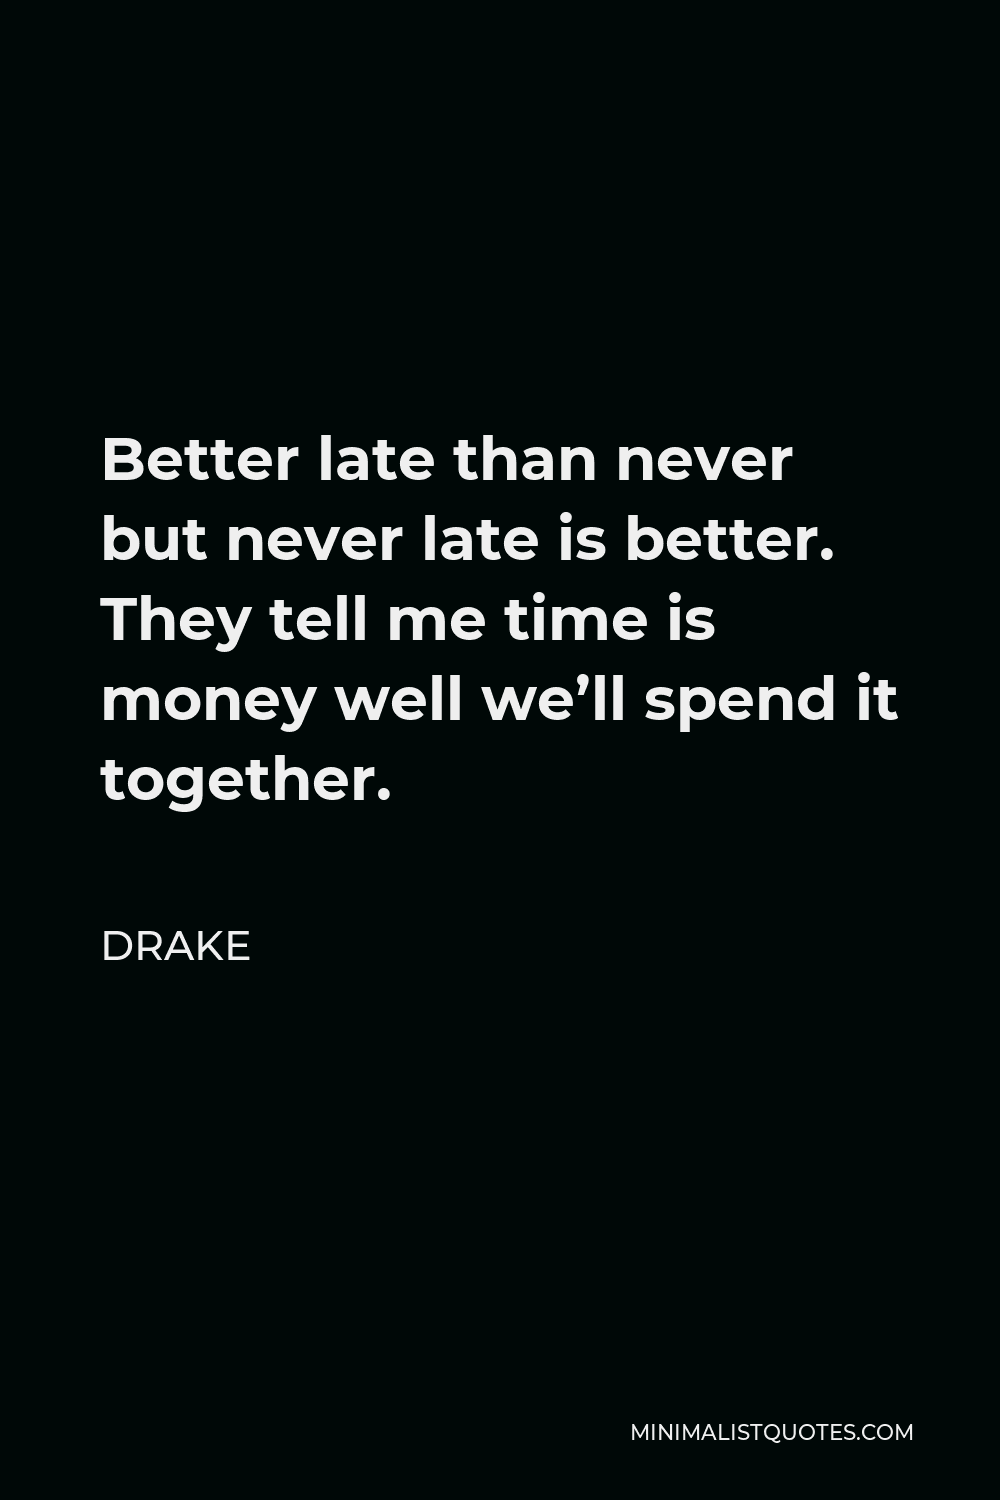 Drake Quote - Better late than never but never late is better. They tell me time is money well we’ll spend it together.